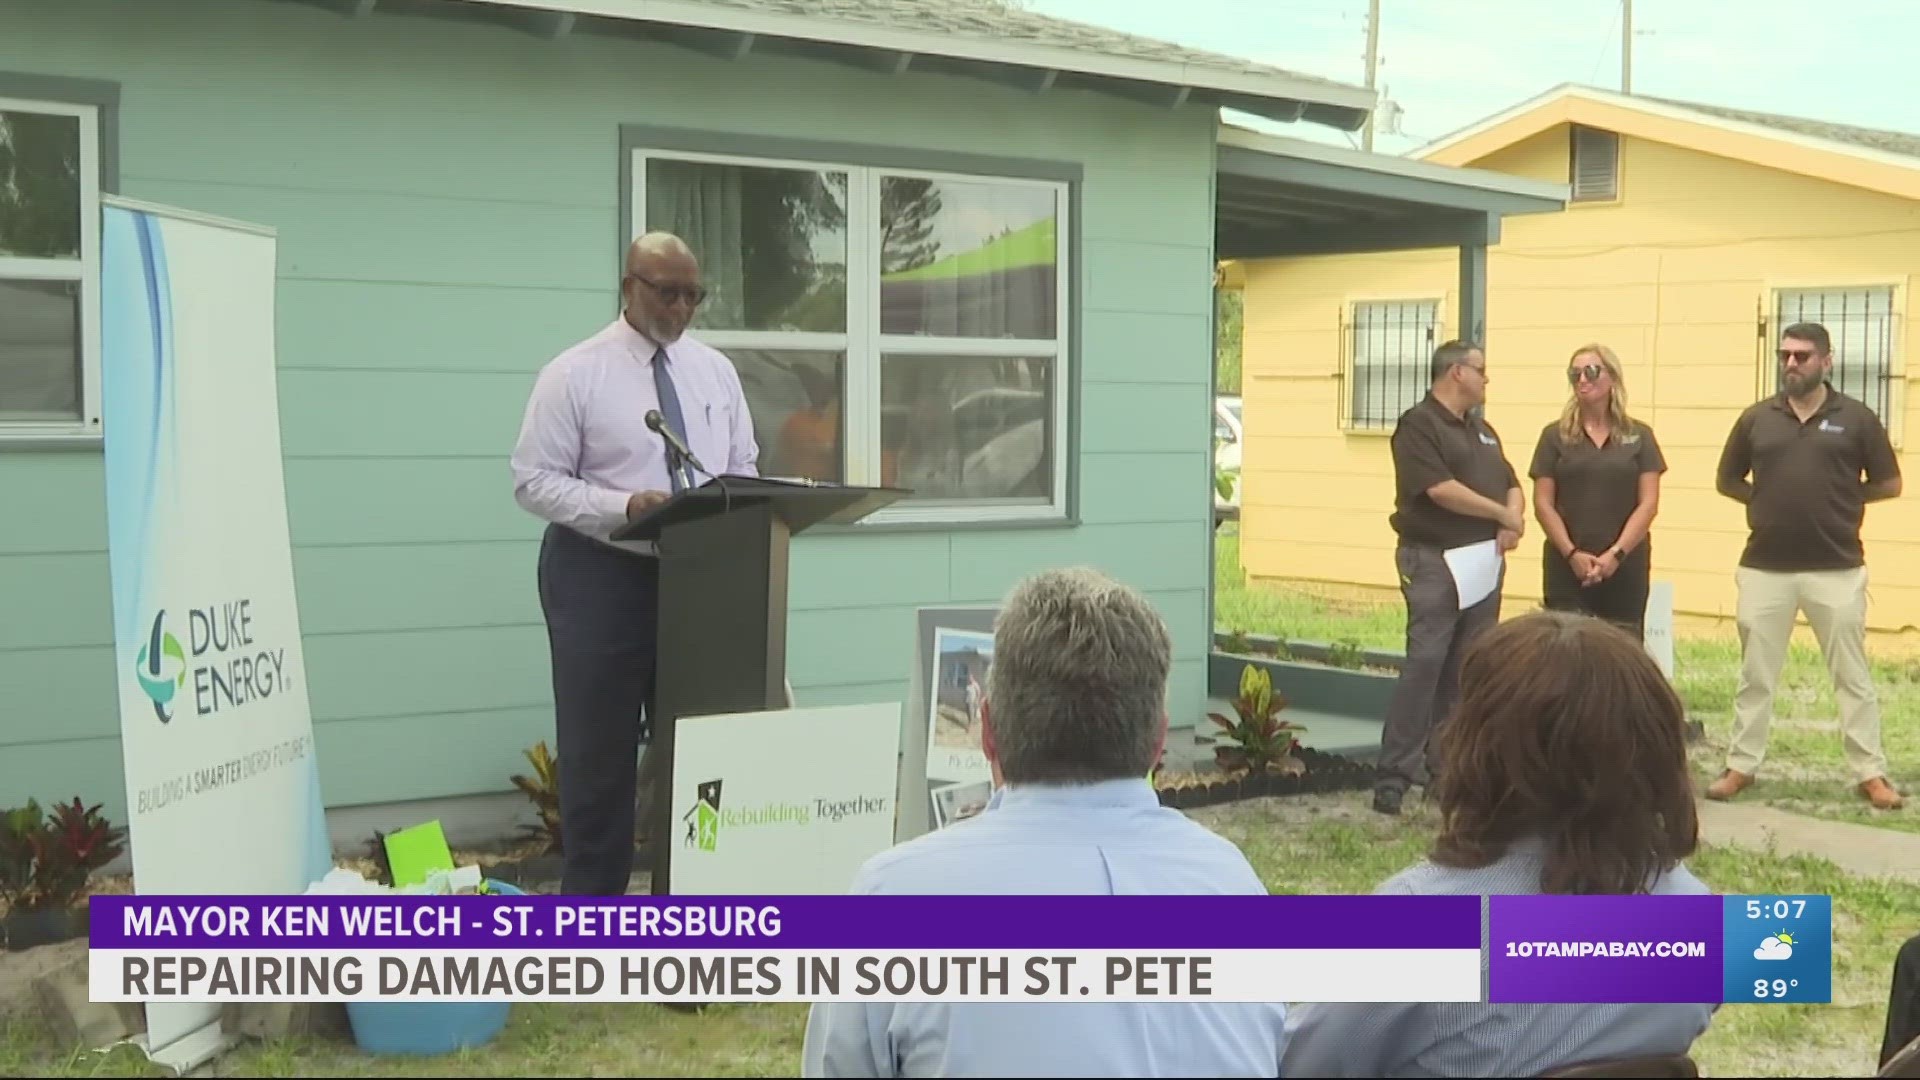 St. Petersburg Mayor Welch toured a home that received $29,000 worth of improvements from Rebuilding Together Tampa Bay.